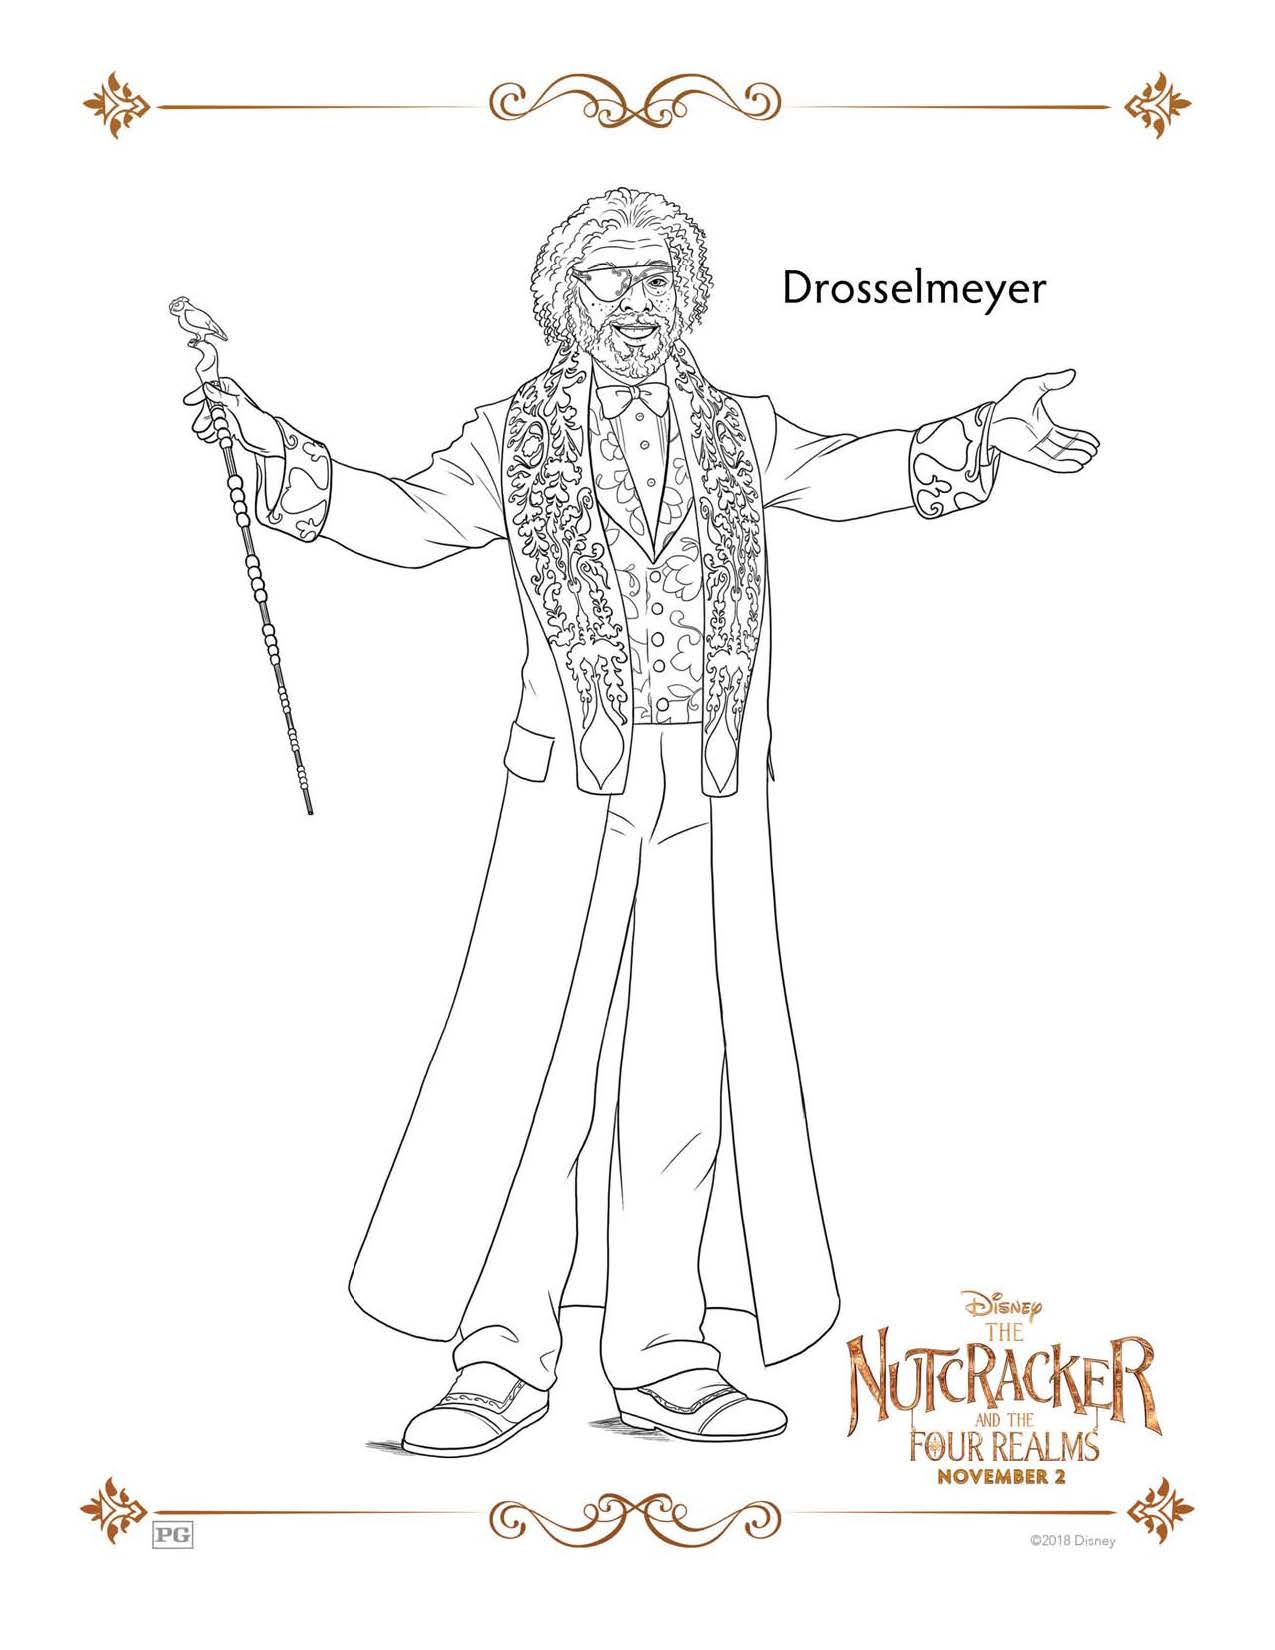 Drosselmeyer - The Nutcracker and The Four Realms Coloring Pages and Activity Sheets